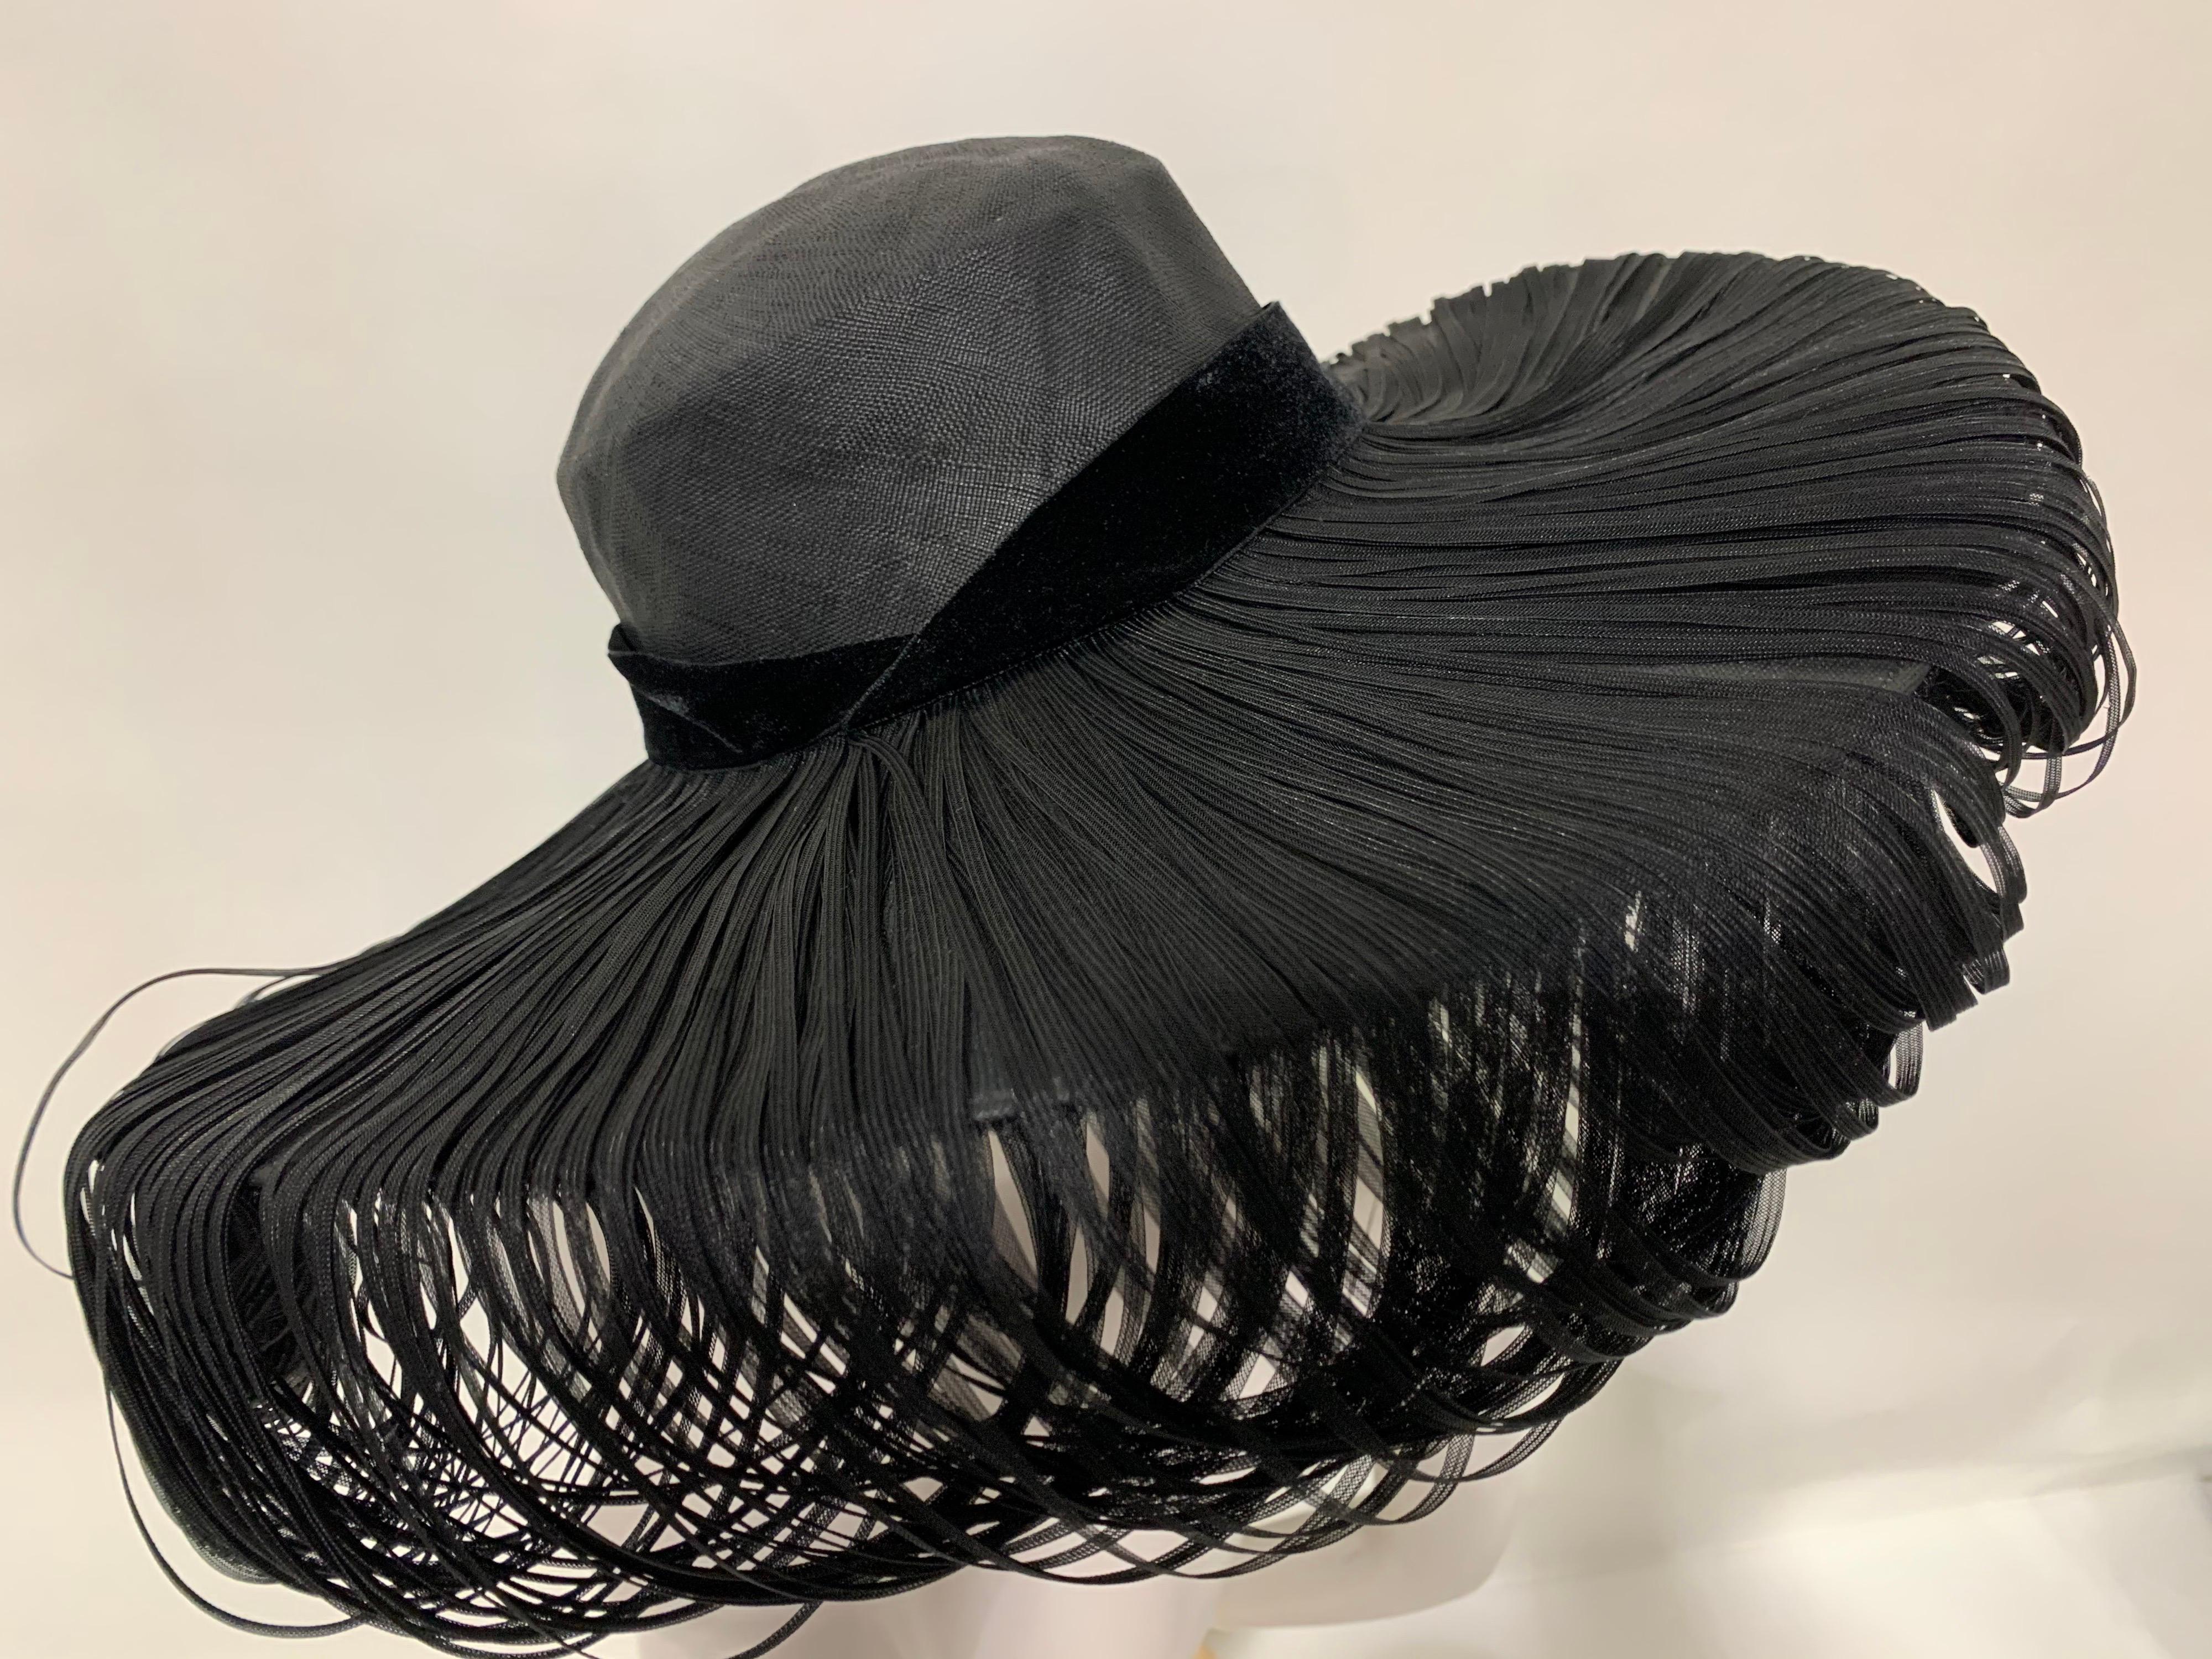 1940s Hattie Carnegie Fine Woven Black Straw Cartwheel Hat with Extravagant Loops. A spectacular and dramatic large brim straw hat with an unusual decorative treatment of draped, woven straw over entire brim. Black velvet banded. A rare sample of